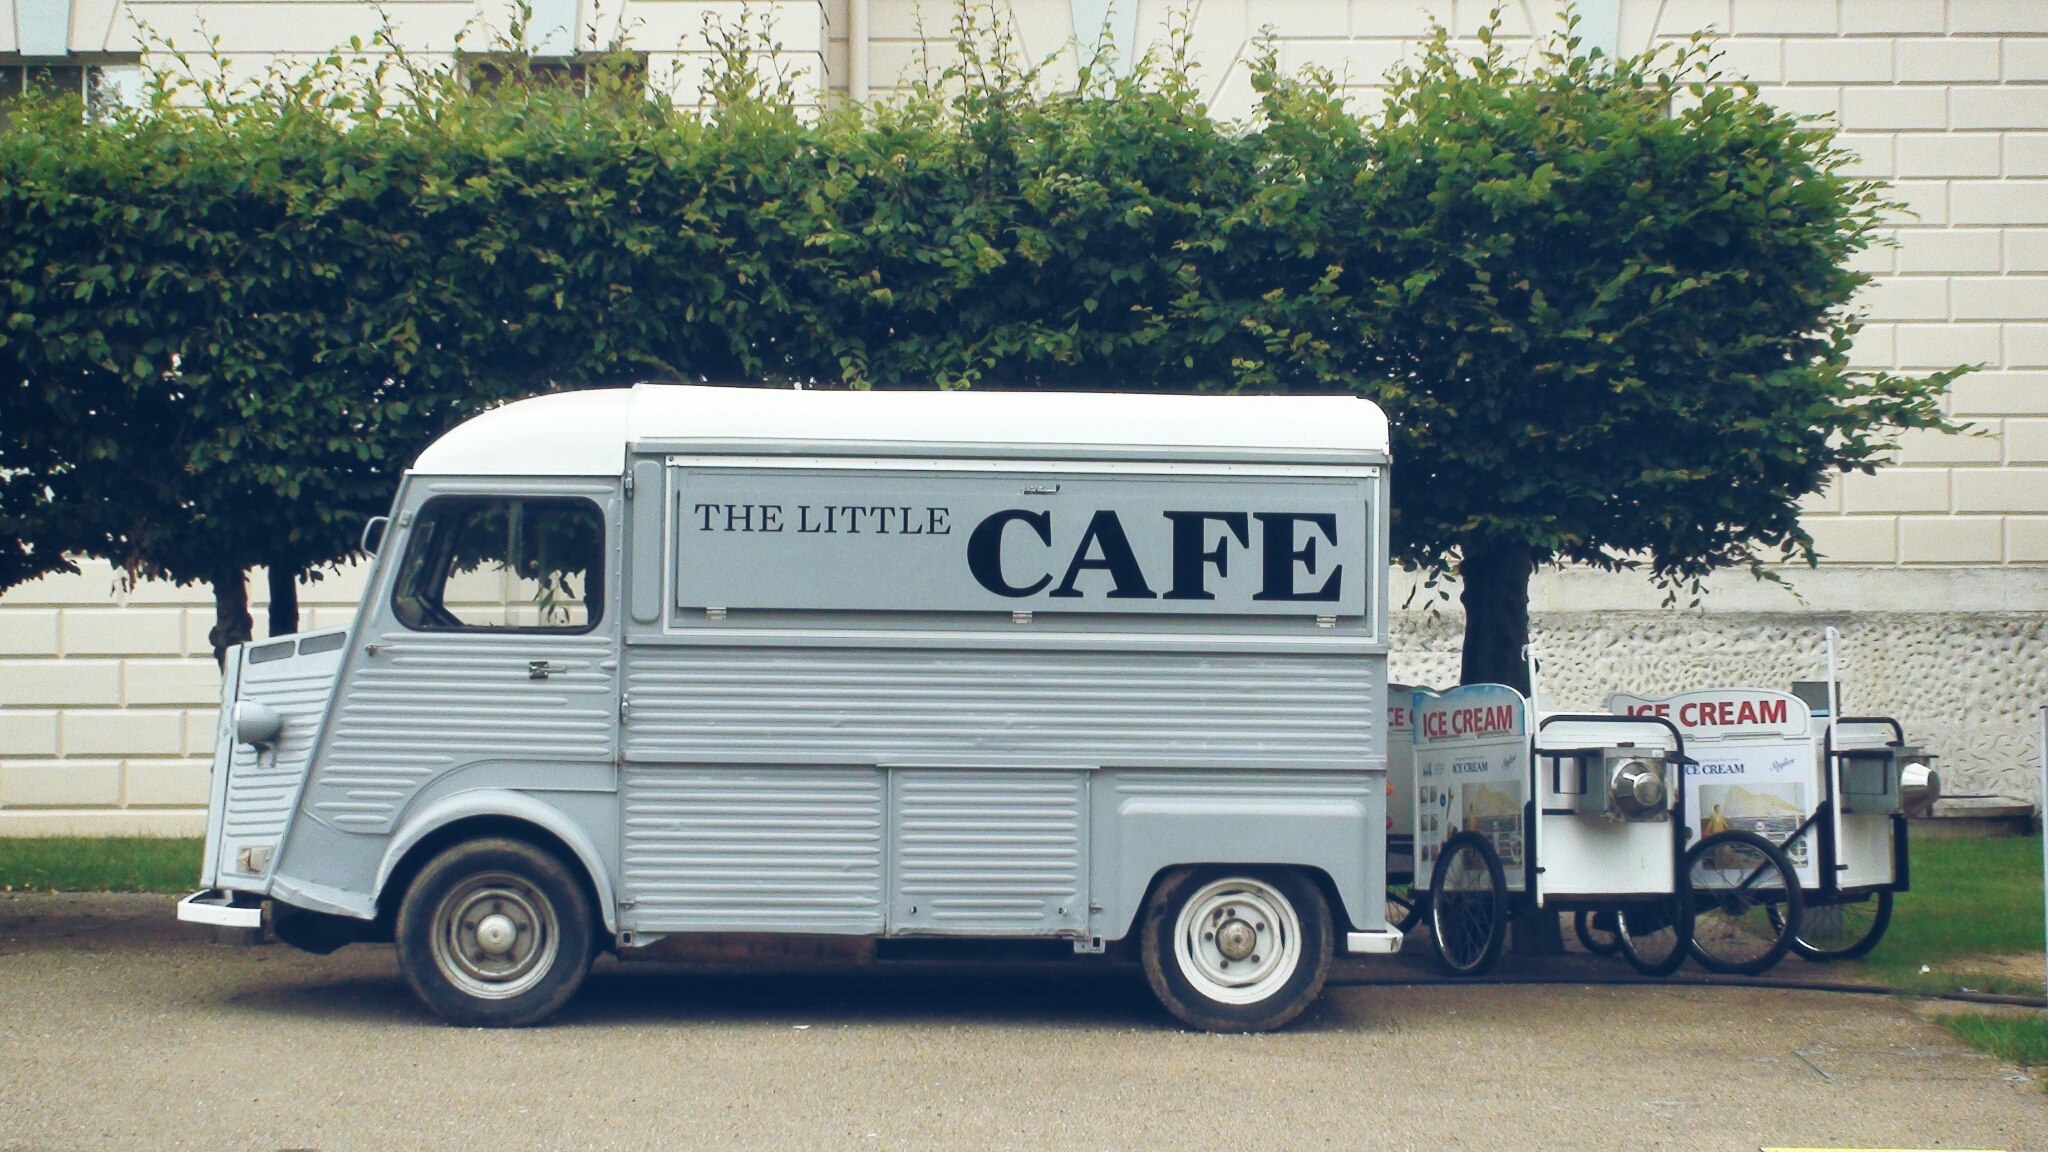 Mobile coffee cart and ice cream carts parked on street in front of trees.